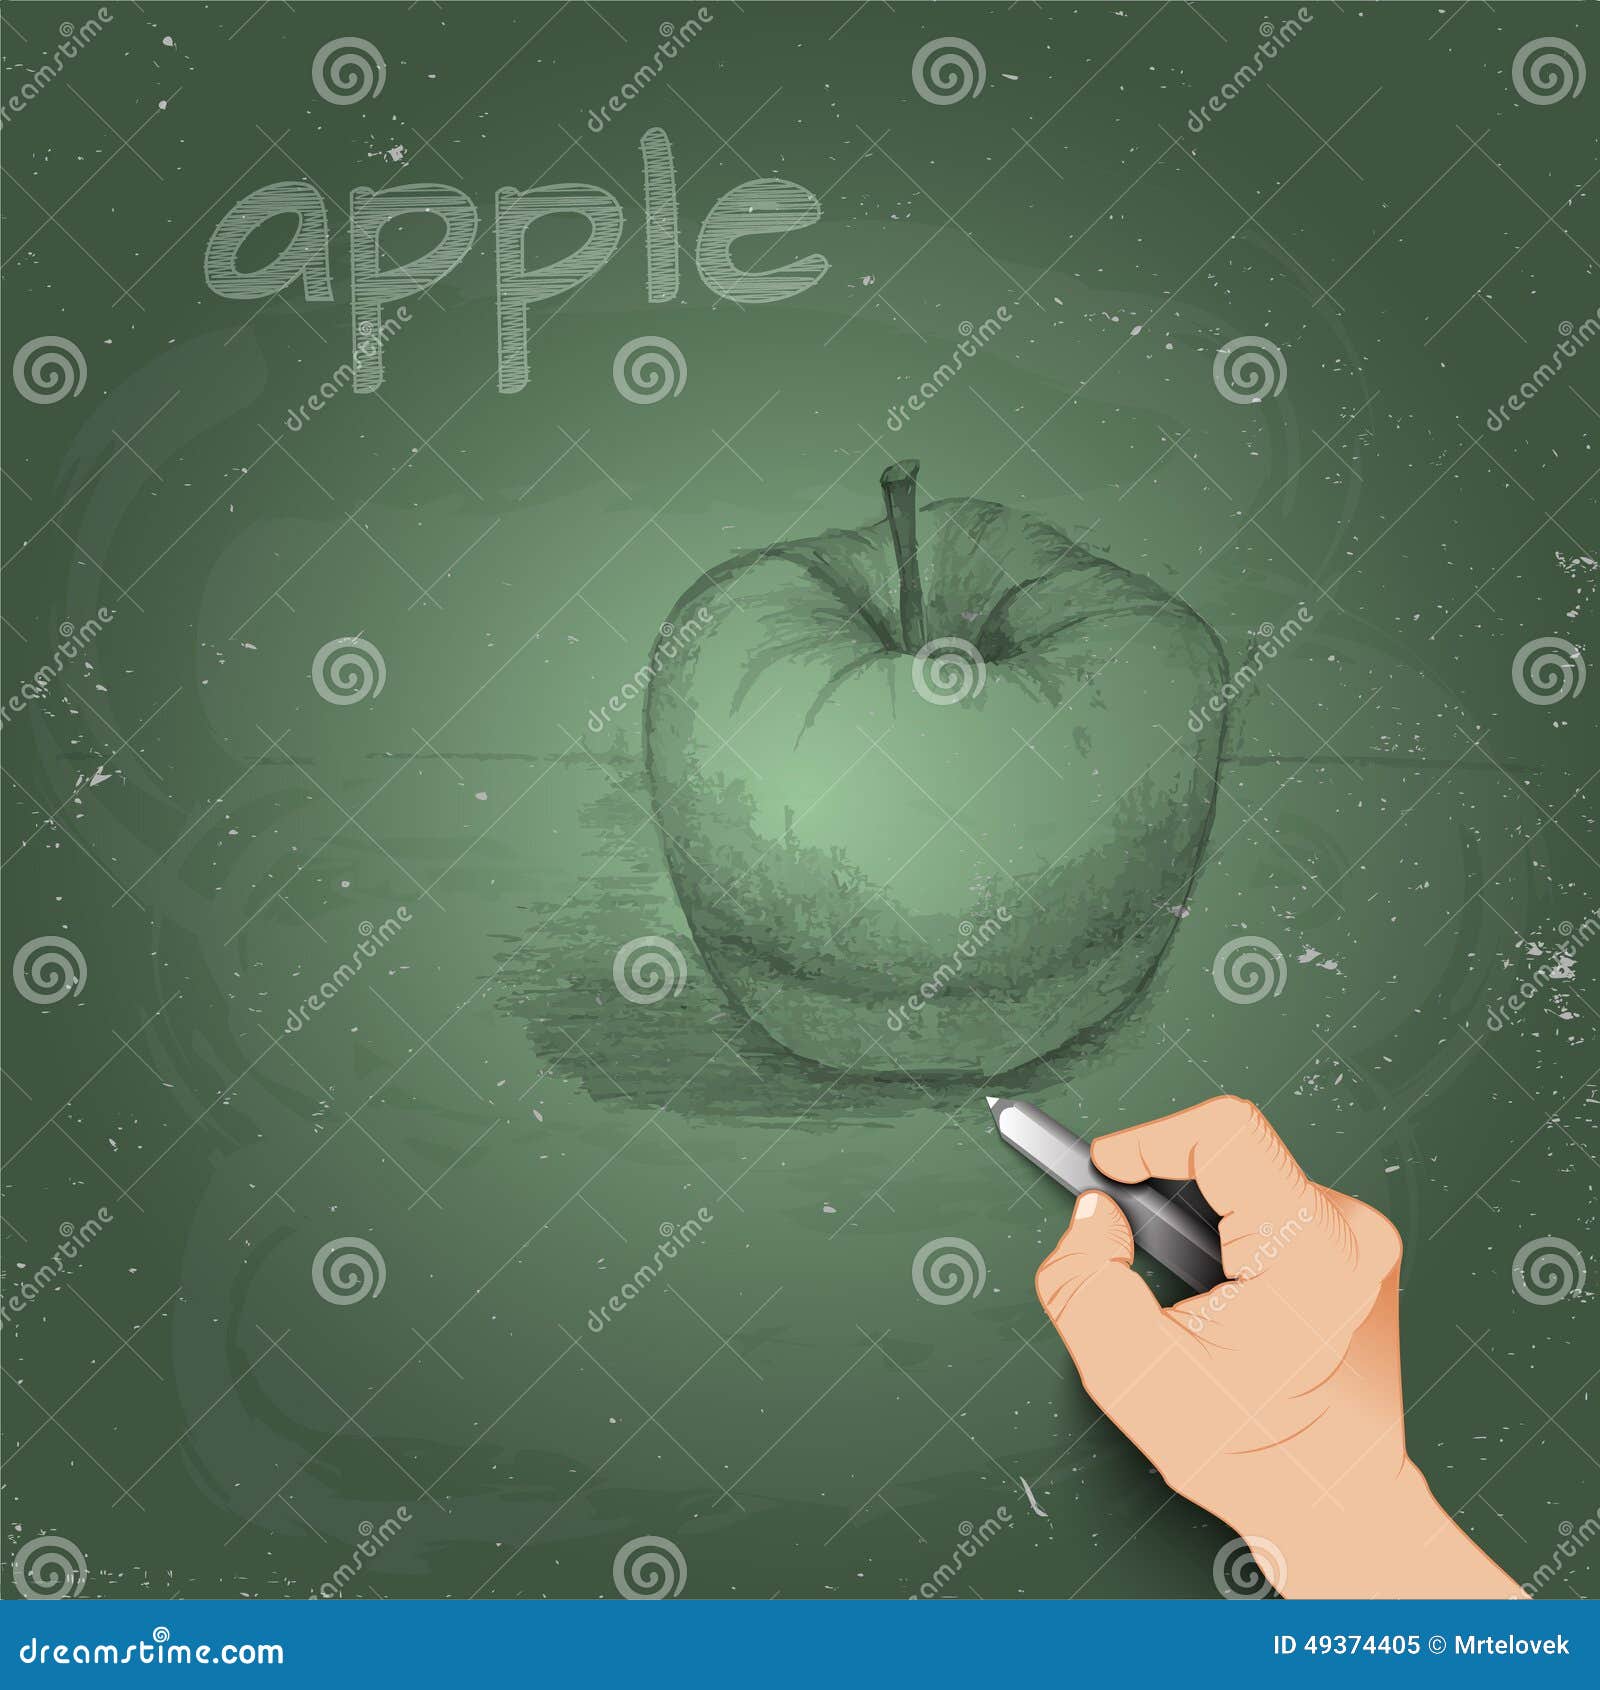 Very Easy How to Draw Apple  3d Drawing of Apple for beginners   YouTube